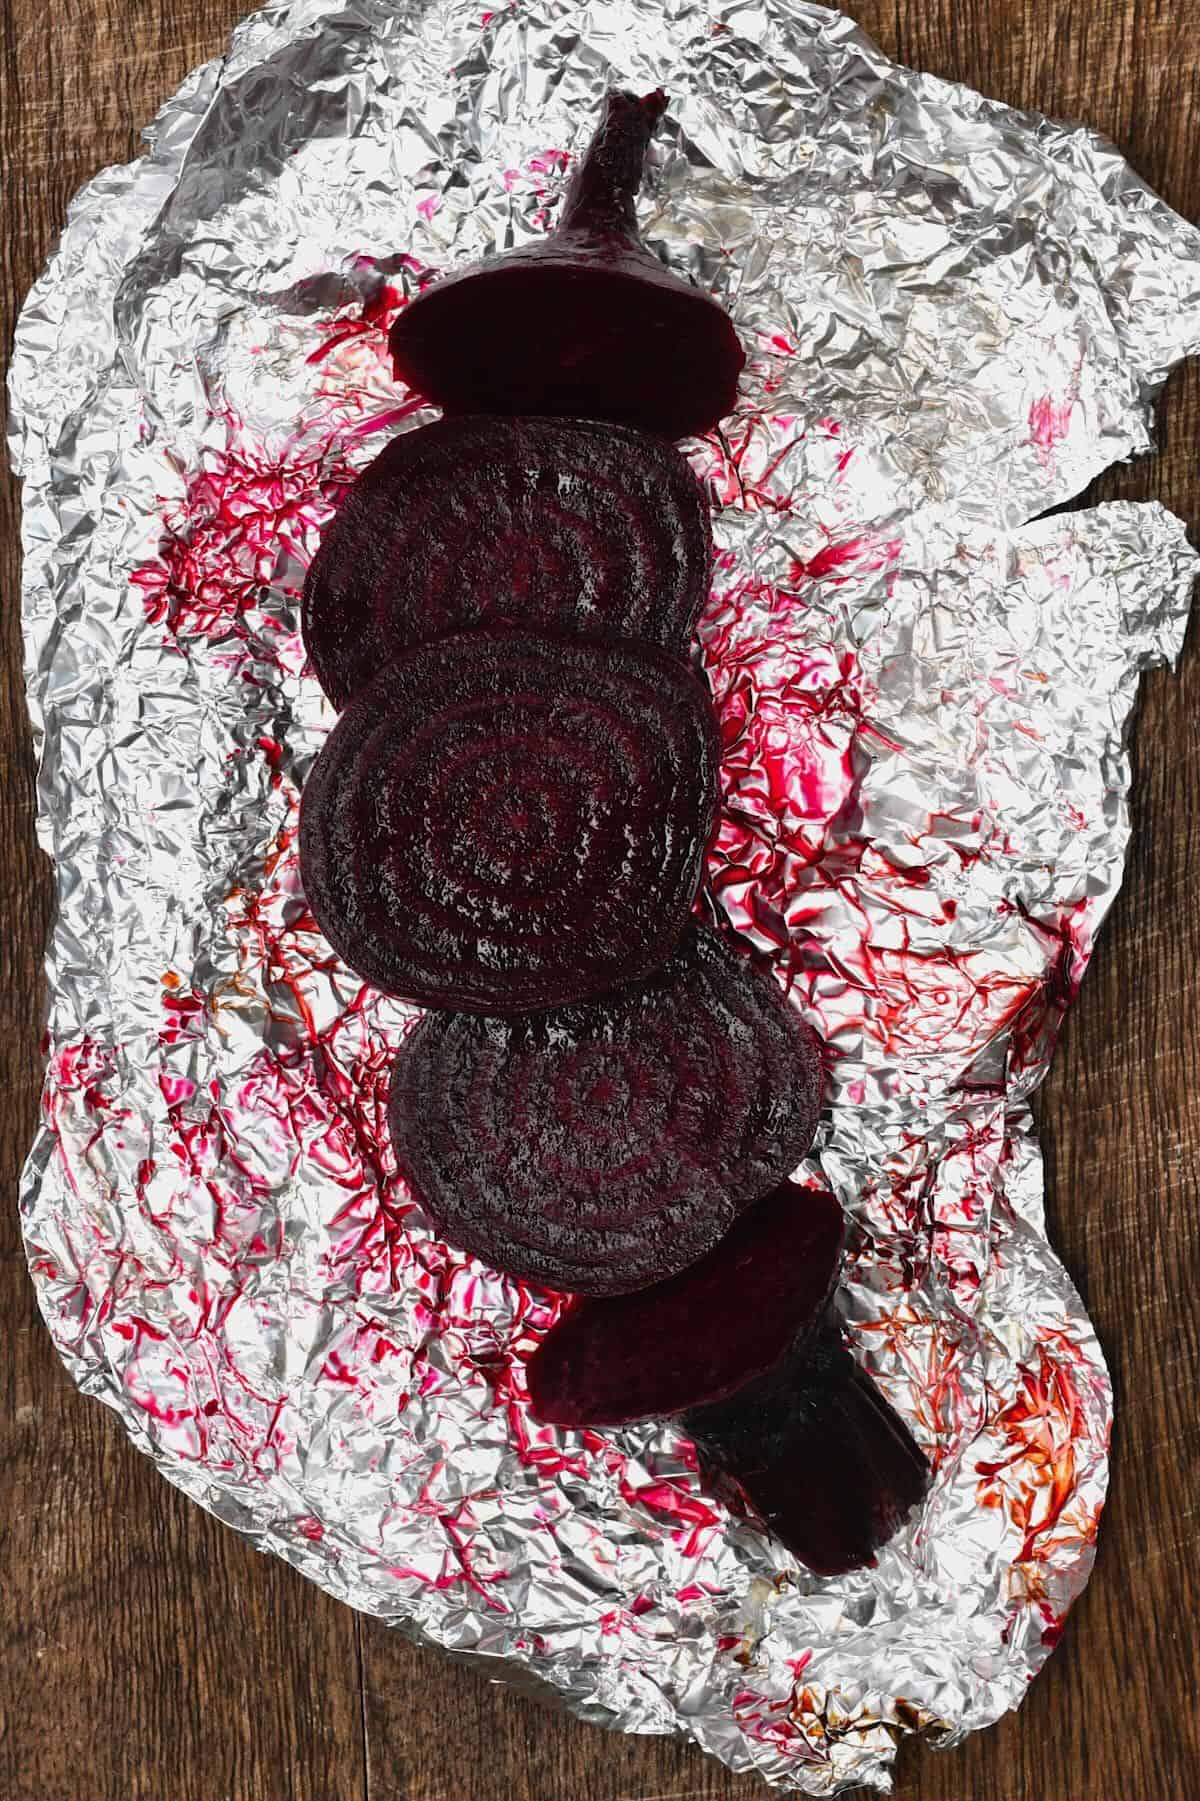 Roasted beetroot sliced into circles